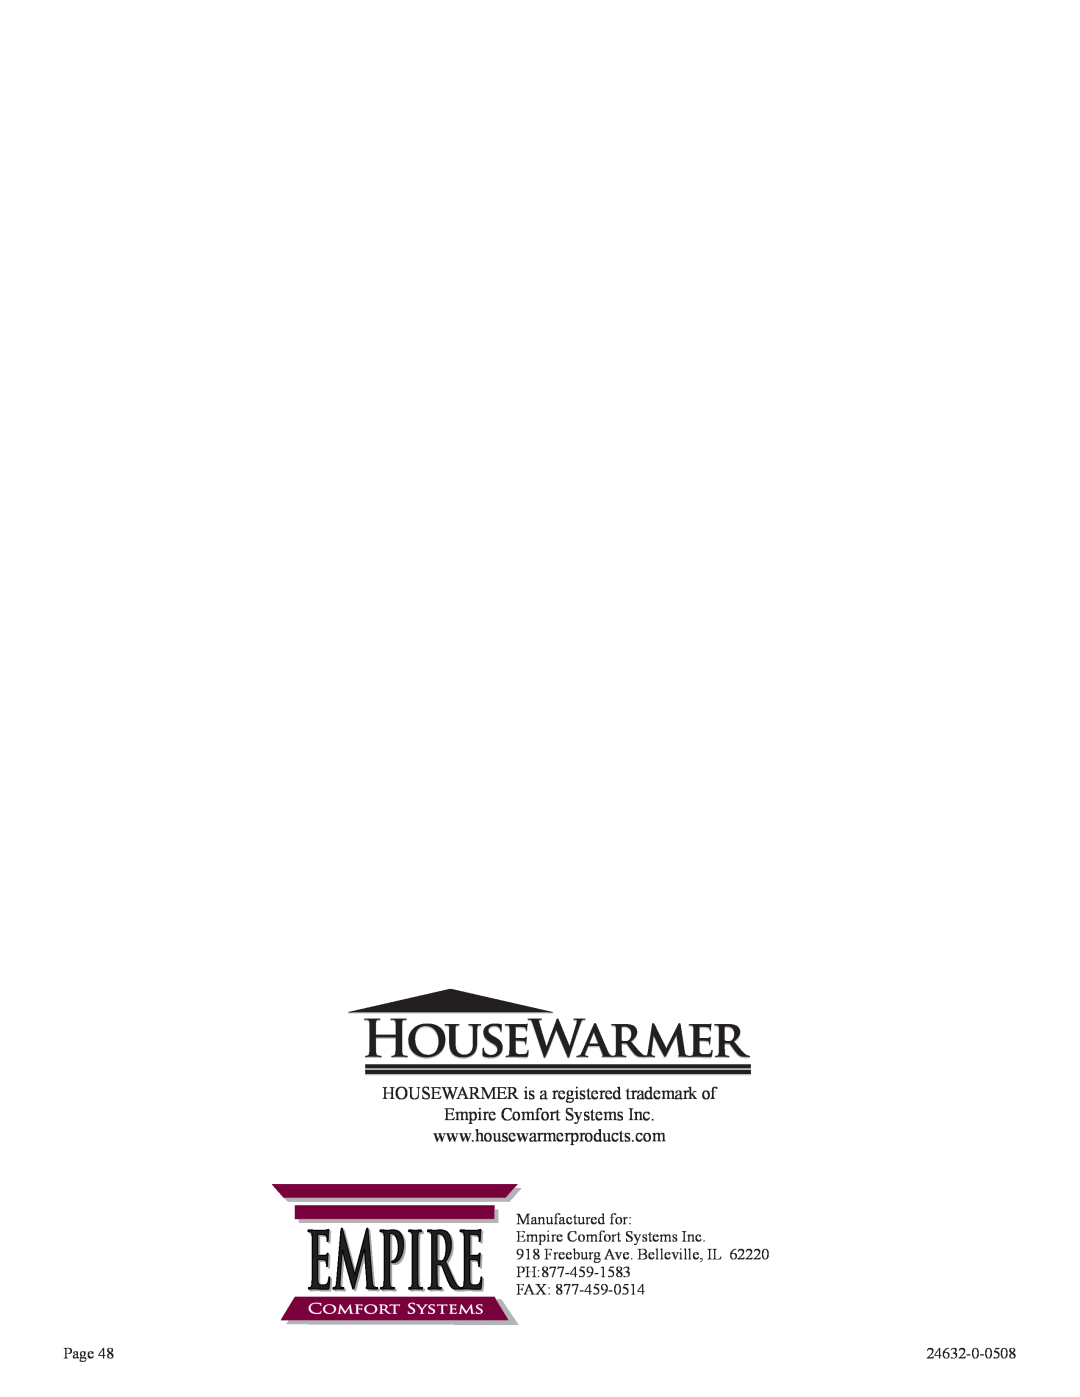 Epson HWDV080DV(N, P)-1 HOUSEWARMER is a registered trademark of, Empire Comfort Systems Inc, Fax, Page, 24632-0-0508 